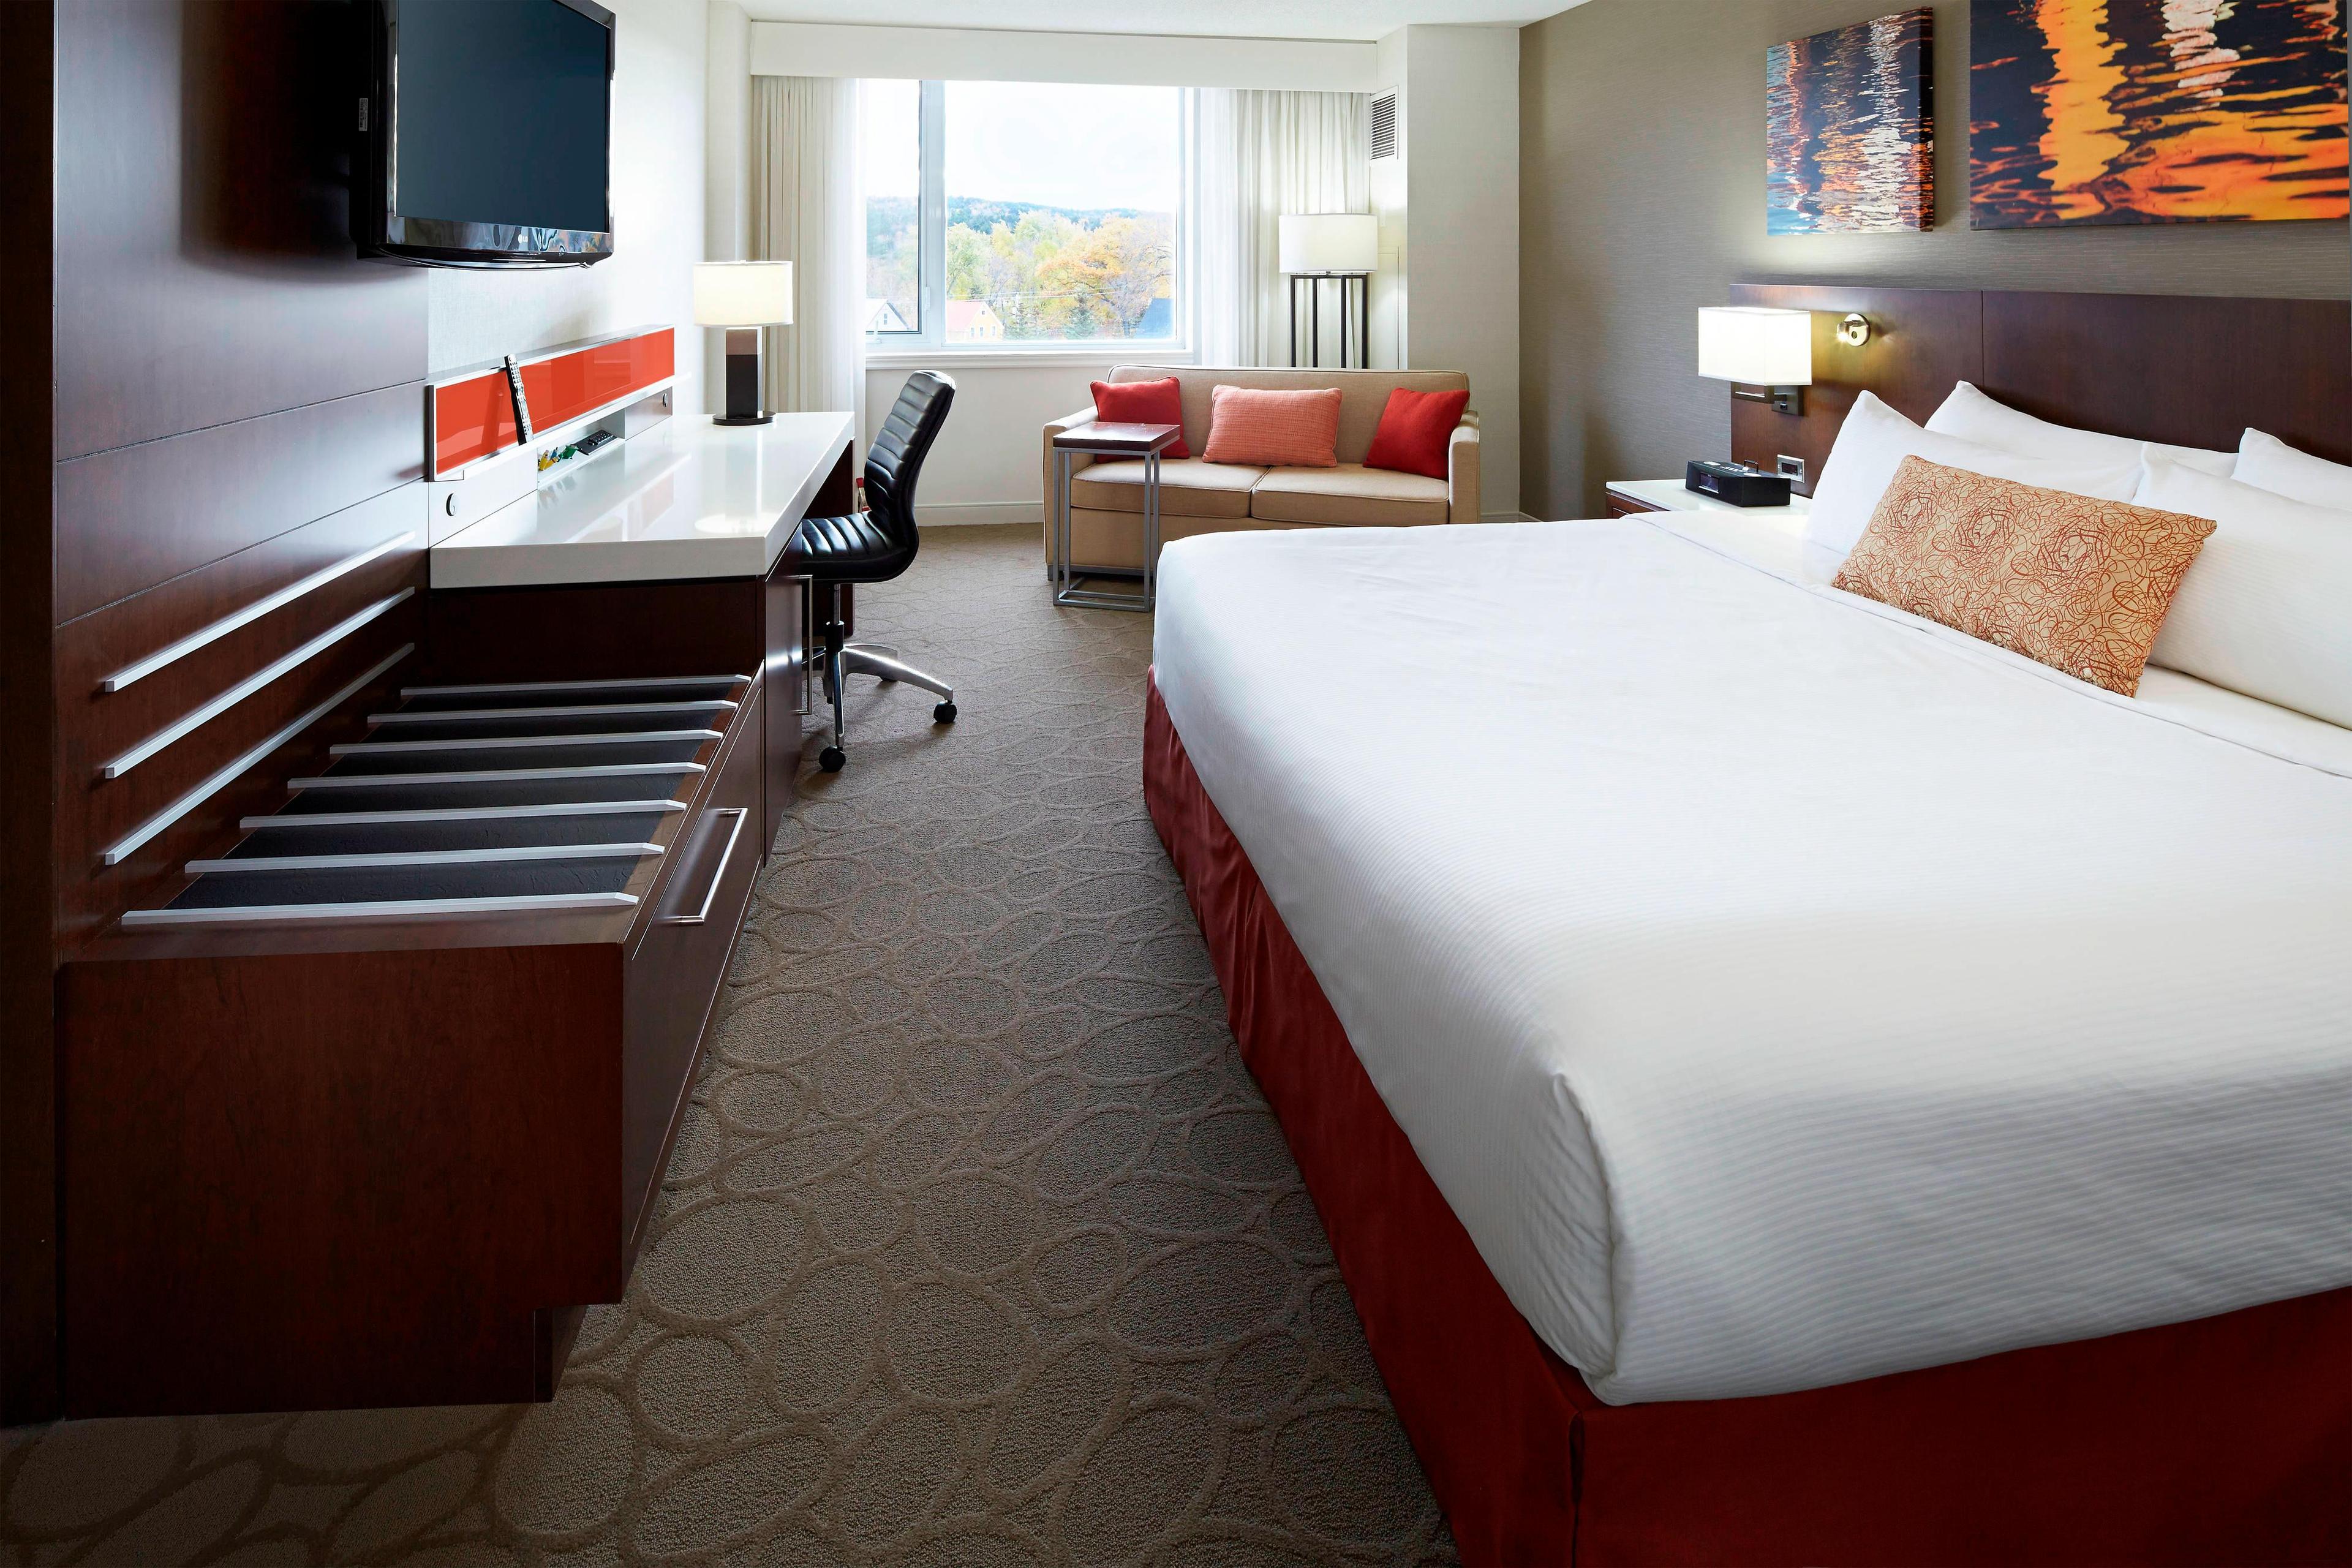 After a busy day in Fredericton, slip into a good night's sleep inspired by the luxurious bedding in our king guest room.